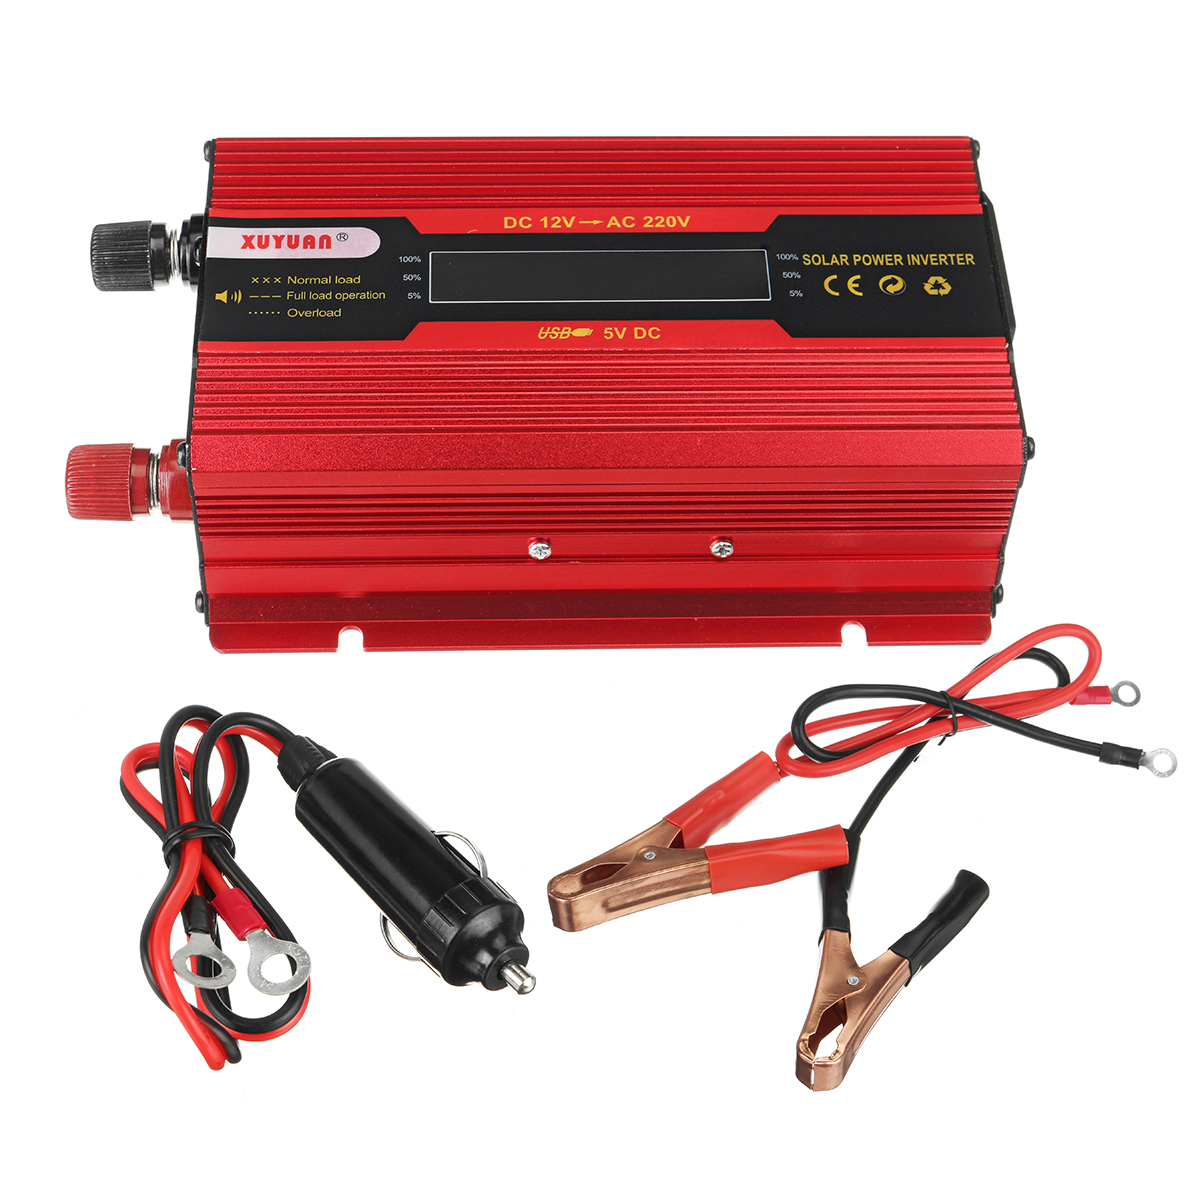 1500W/2500W/3500W Peak Red Solar Power Inverter DC12V to AC220V Modified Sine Wave Converter with LCD Screen for Car Home